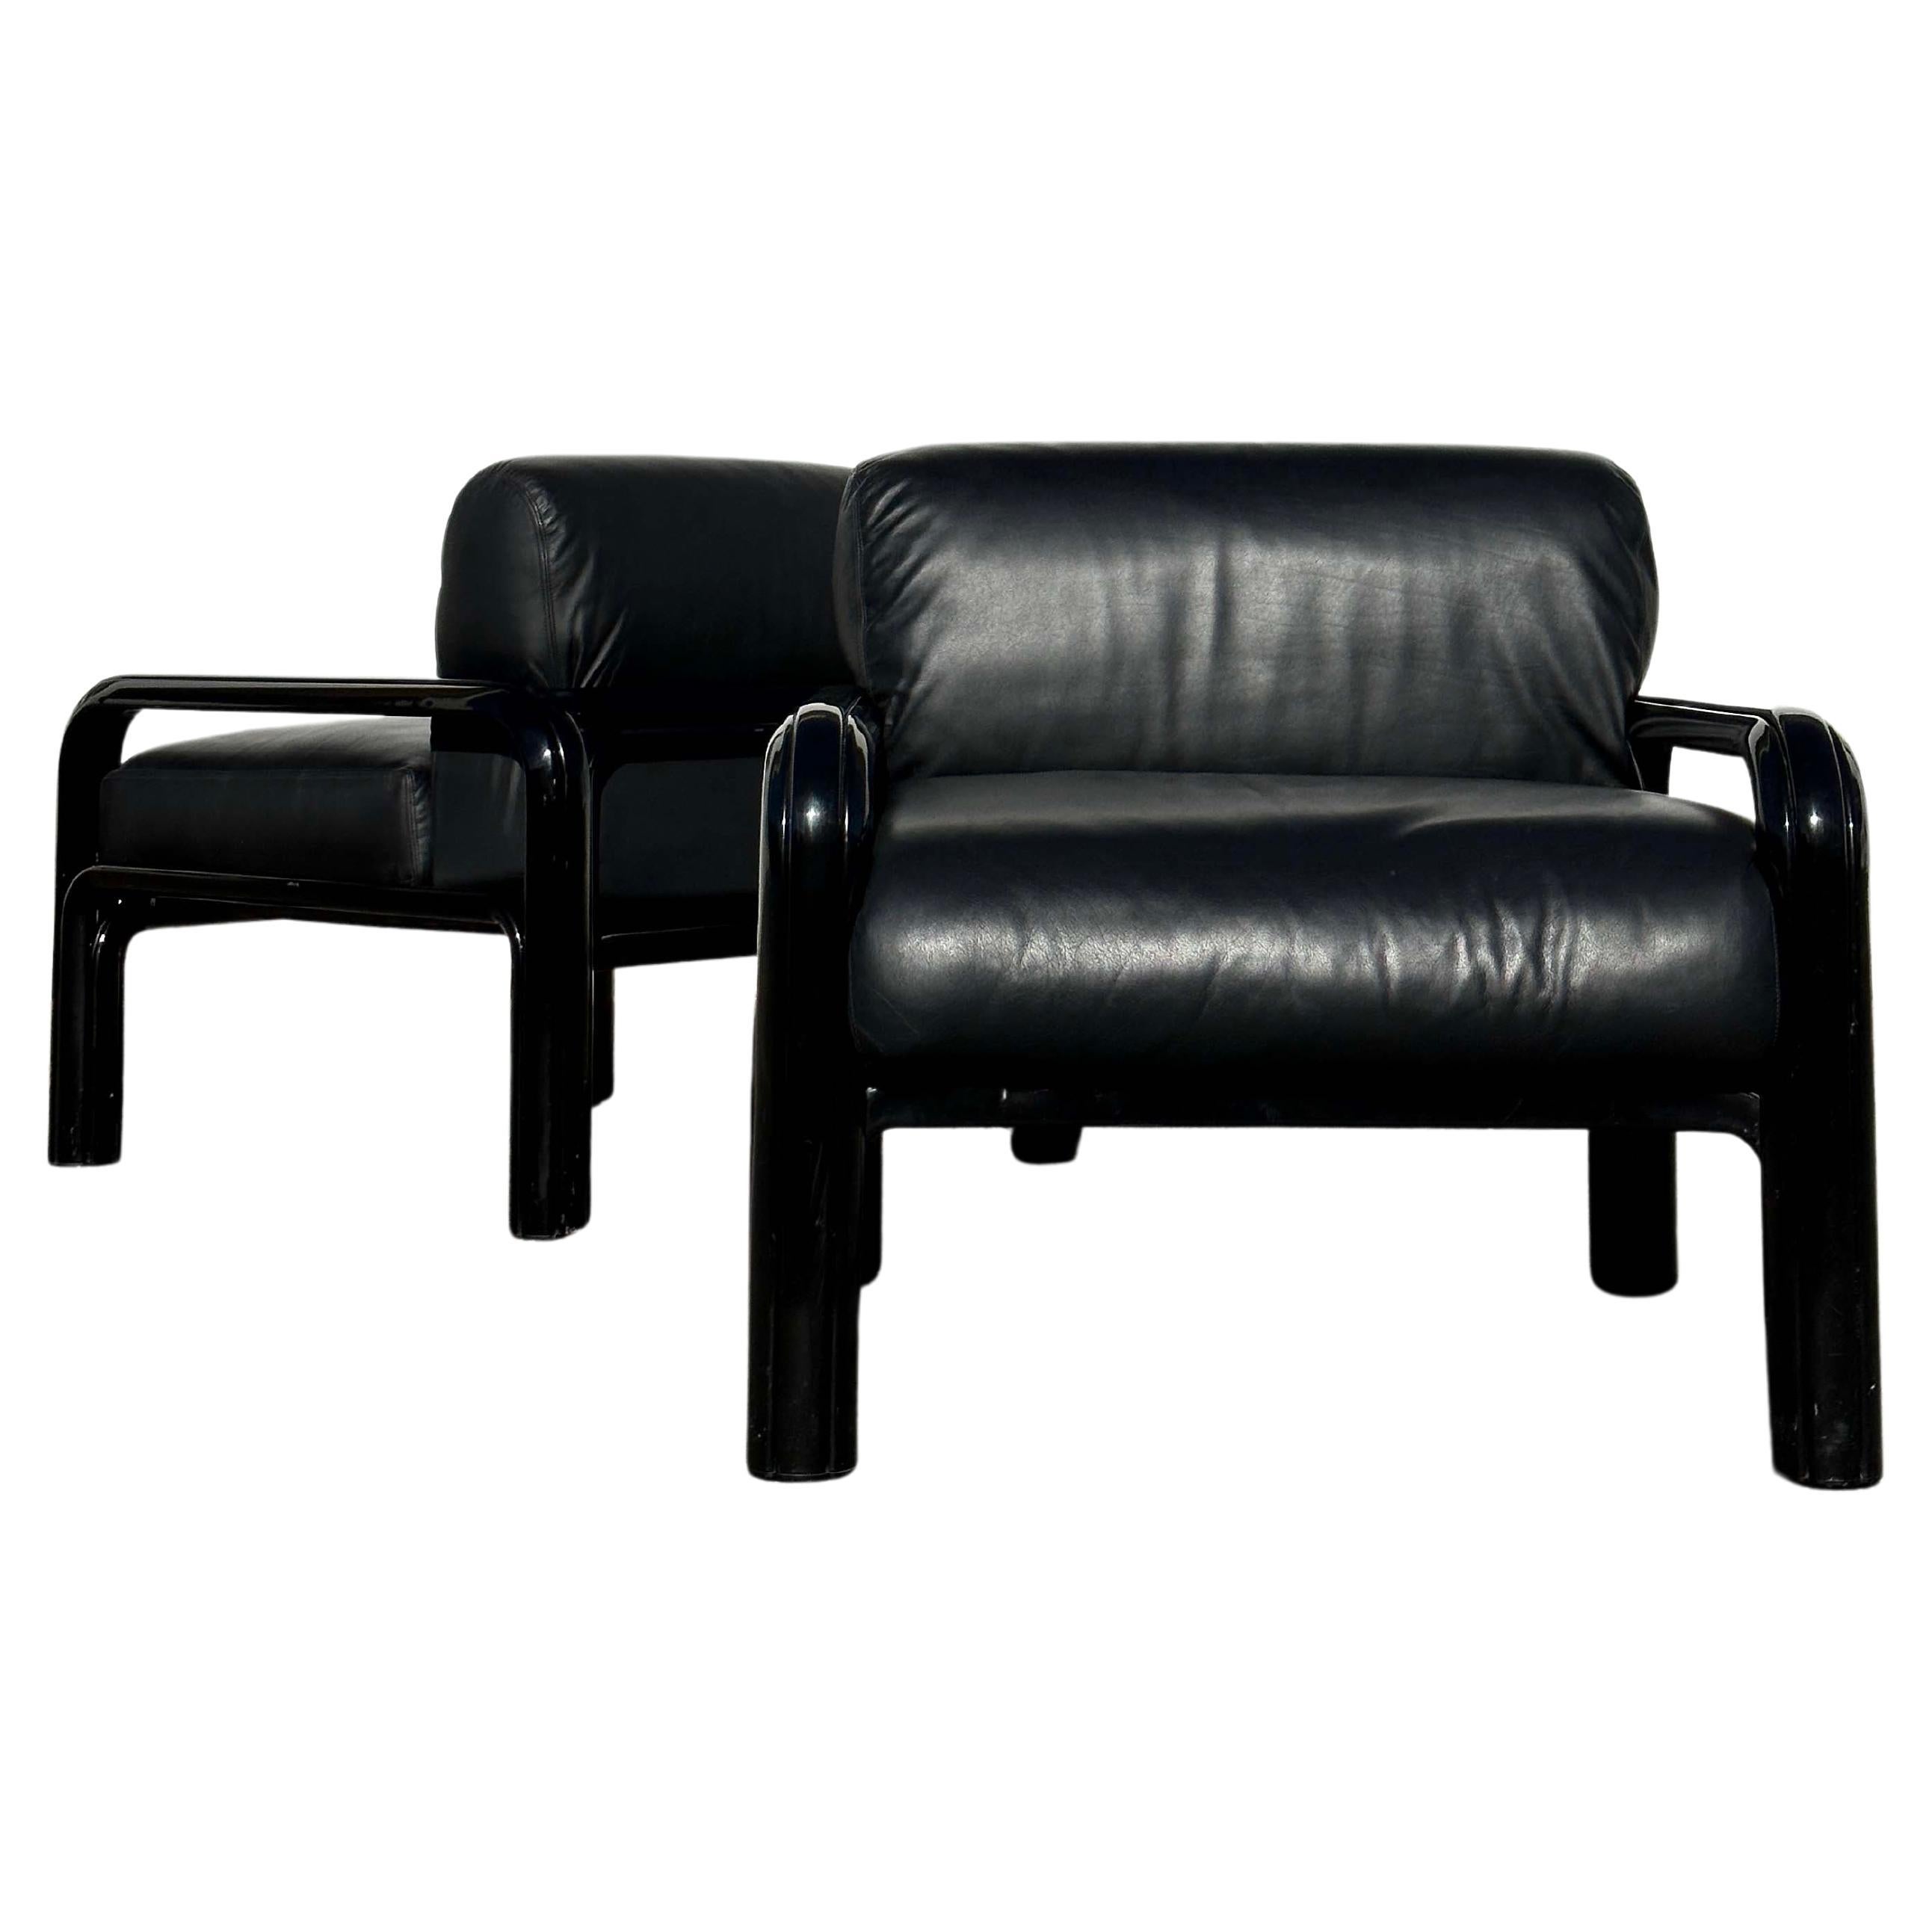 Pair of Gae Aulenti Black Leather Lounge Chairs for Knoll, Marked